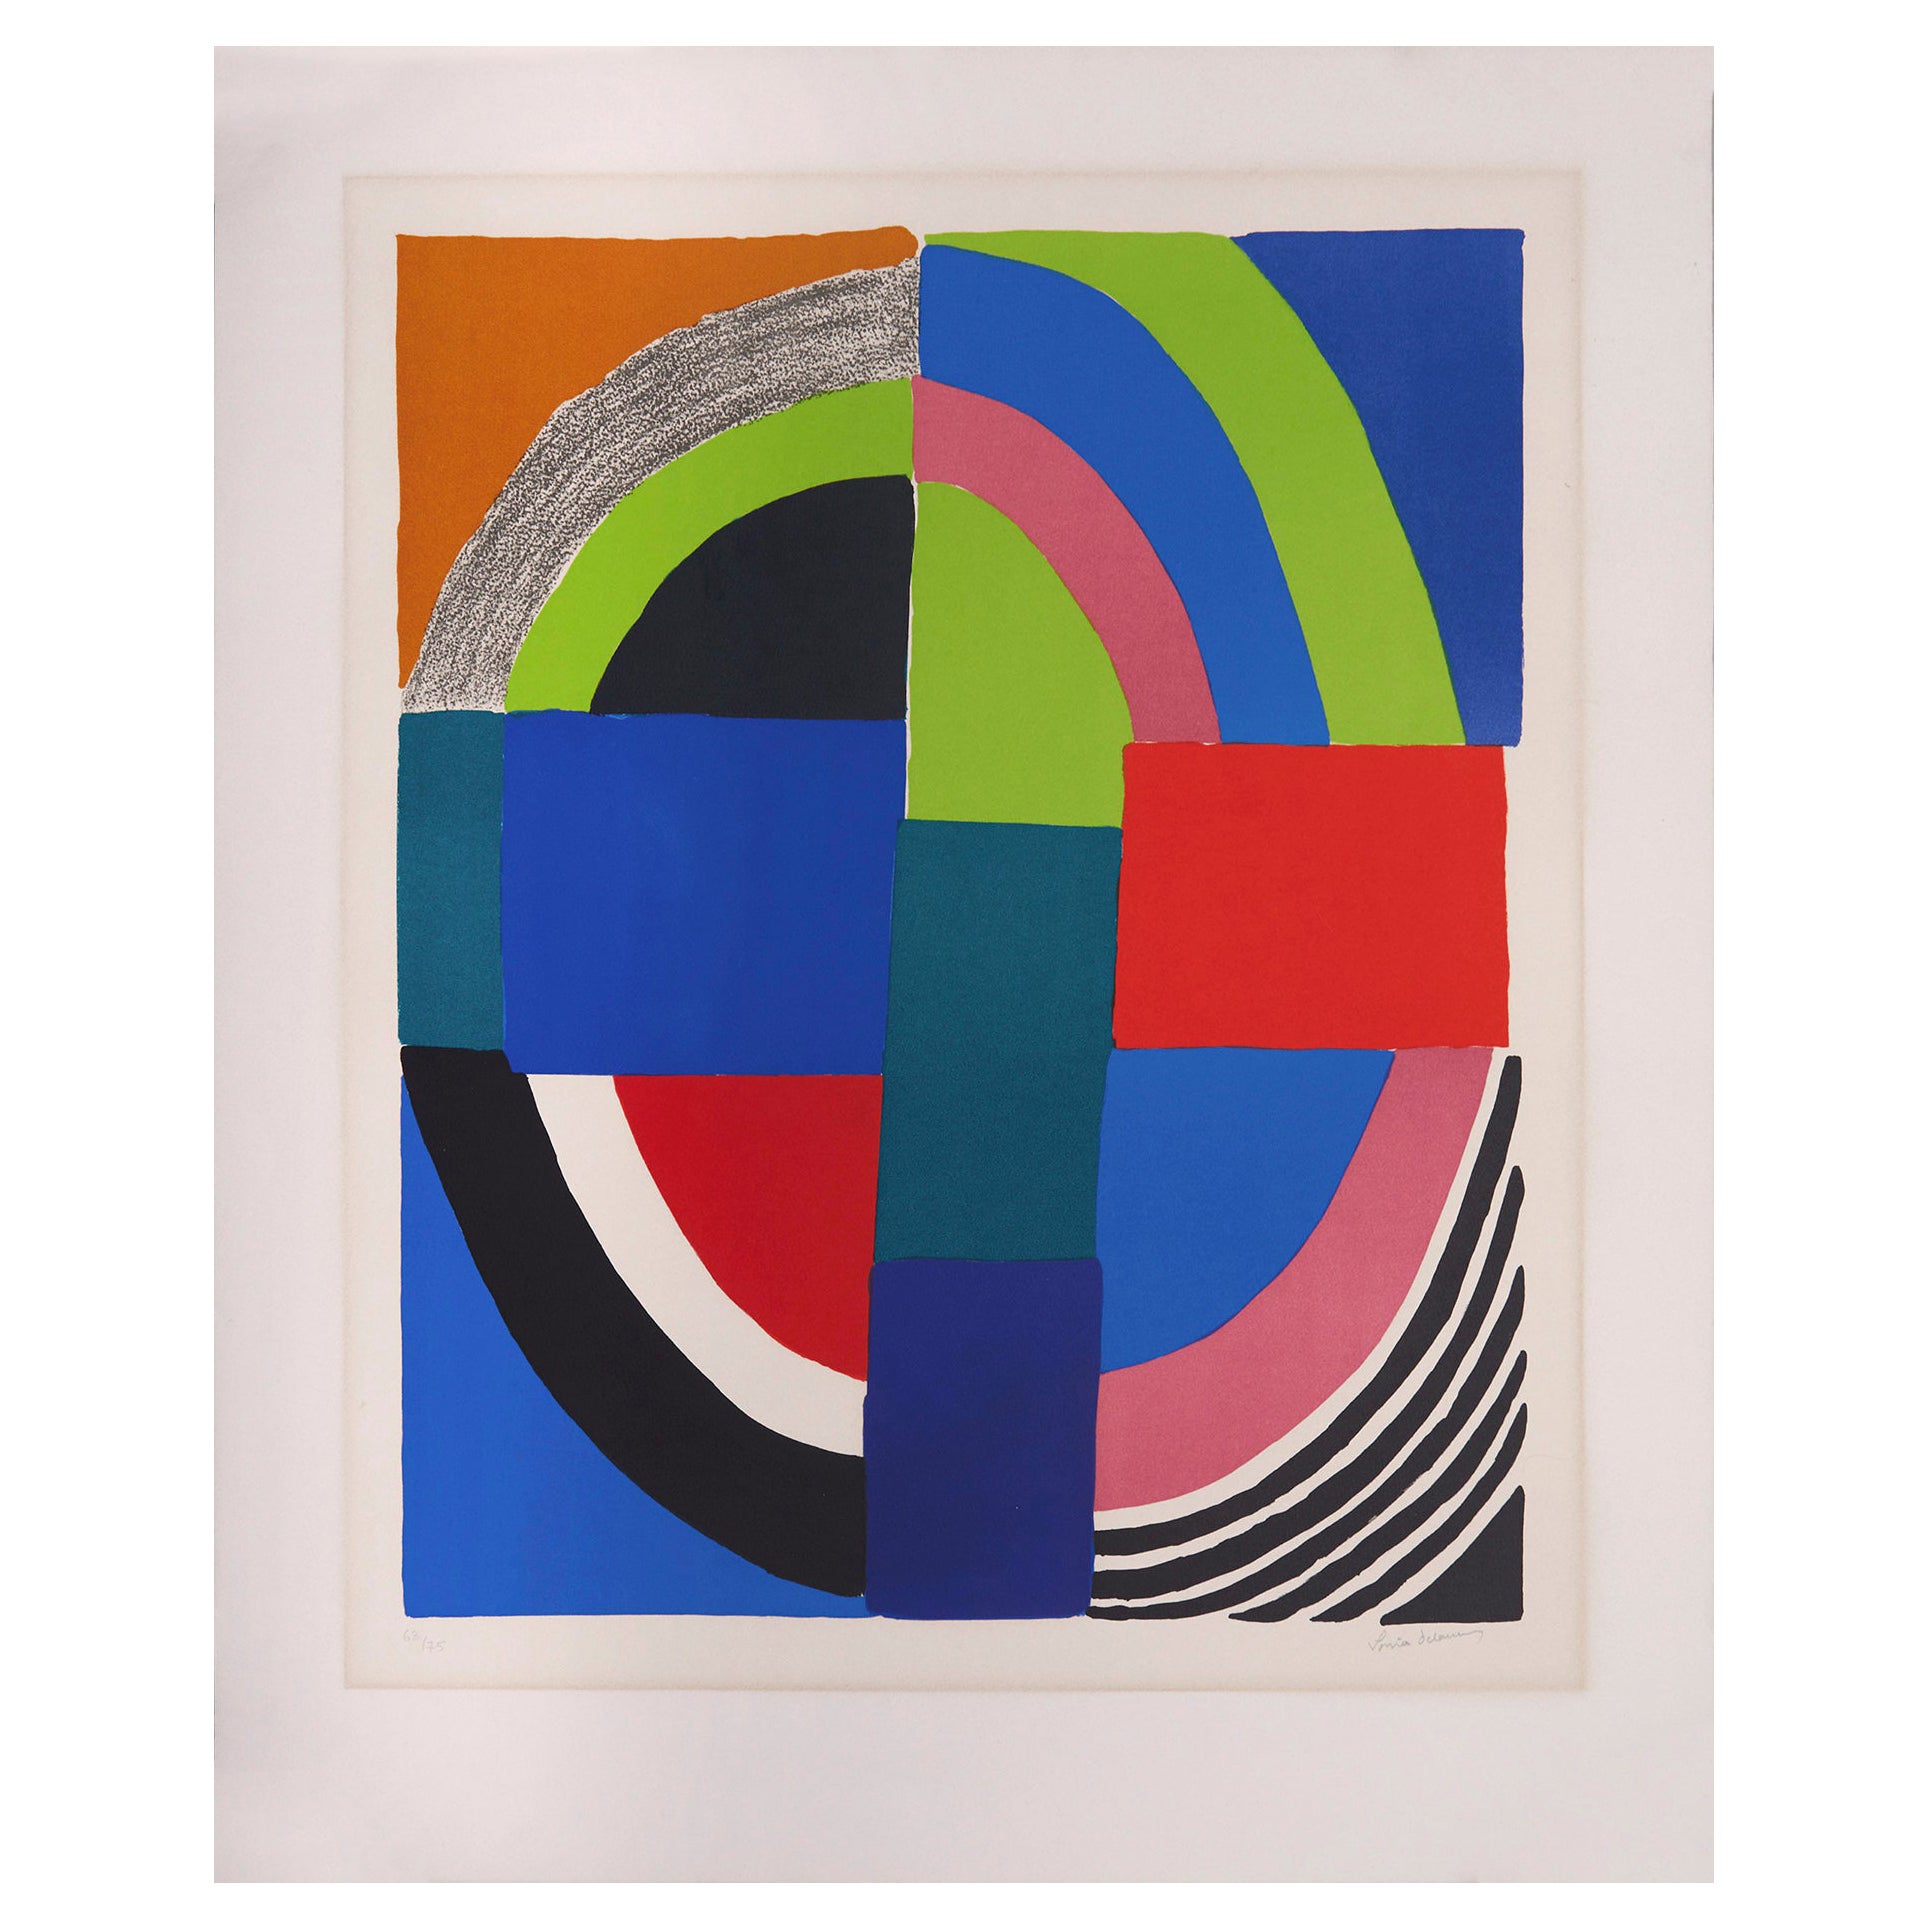 Lithography by Sonia Delaunay edition of 75 ex For Sale